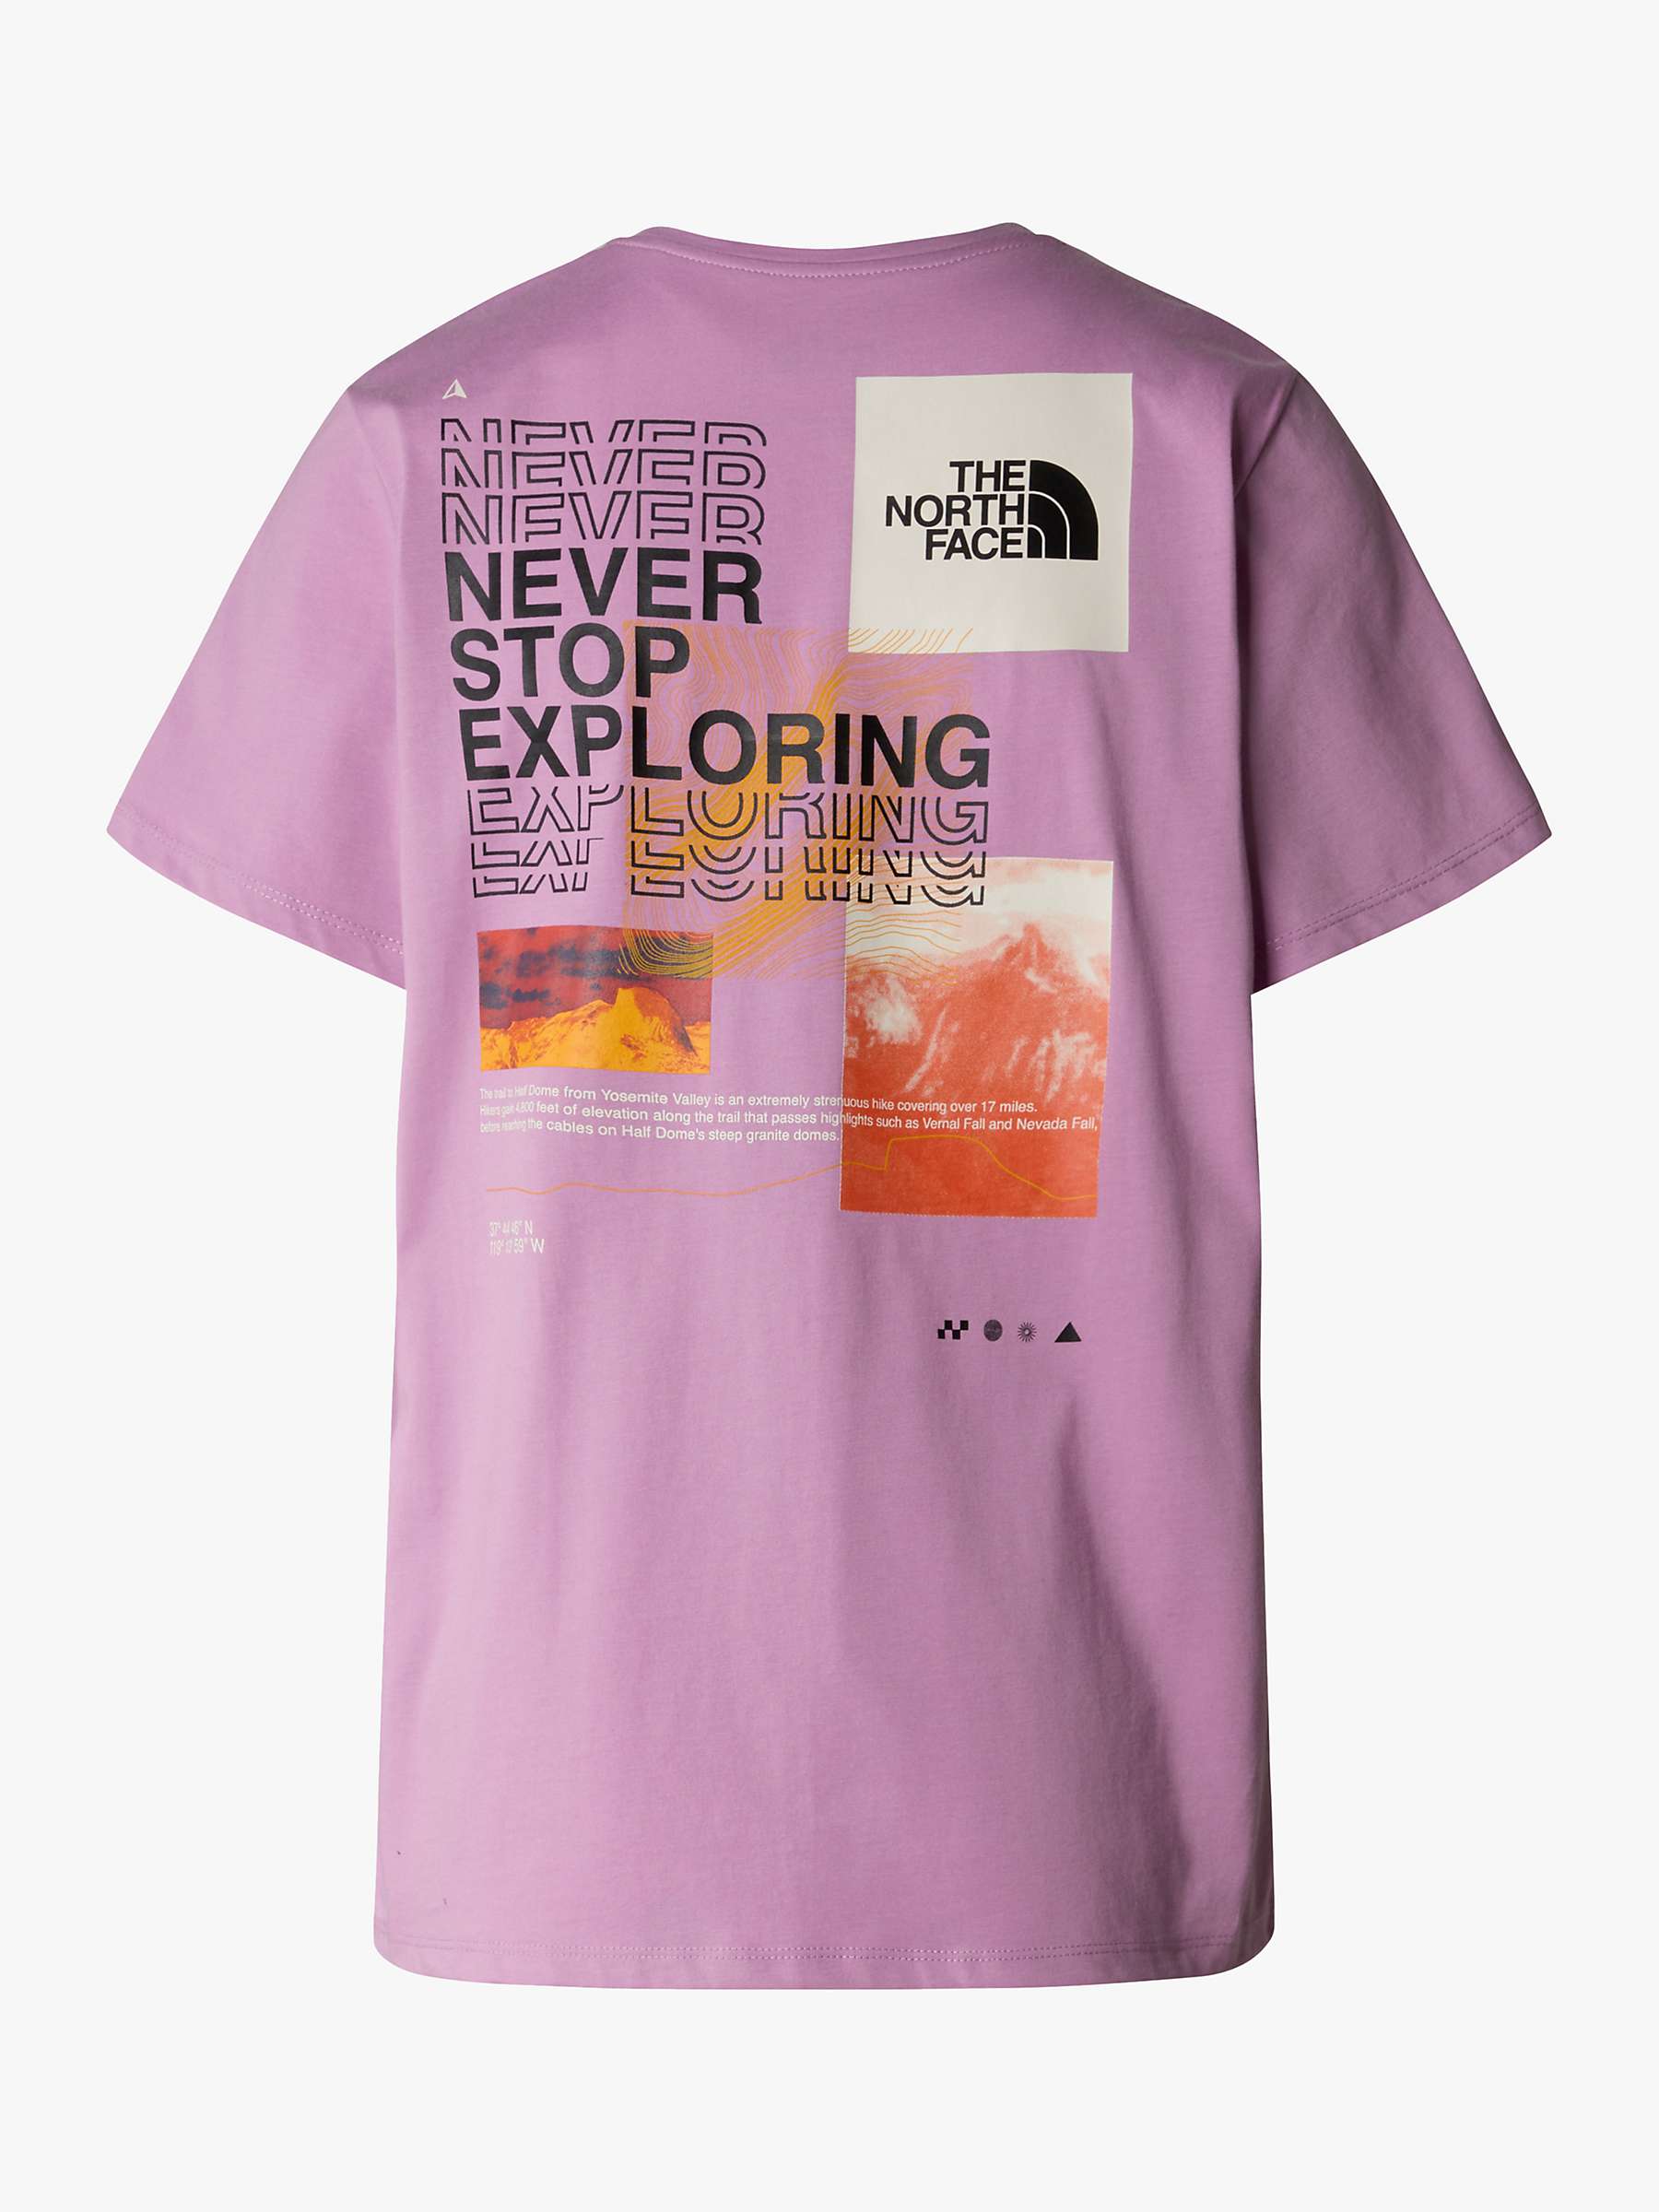 Buy The North Face Foundation Mountain Graphic T-Shirt, Mineral Purple Online at johnlewis.com